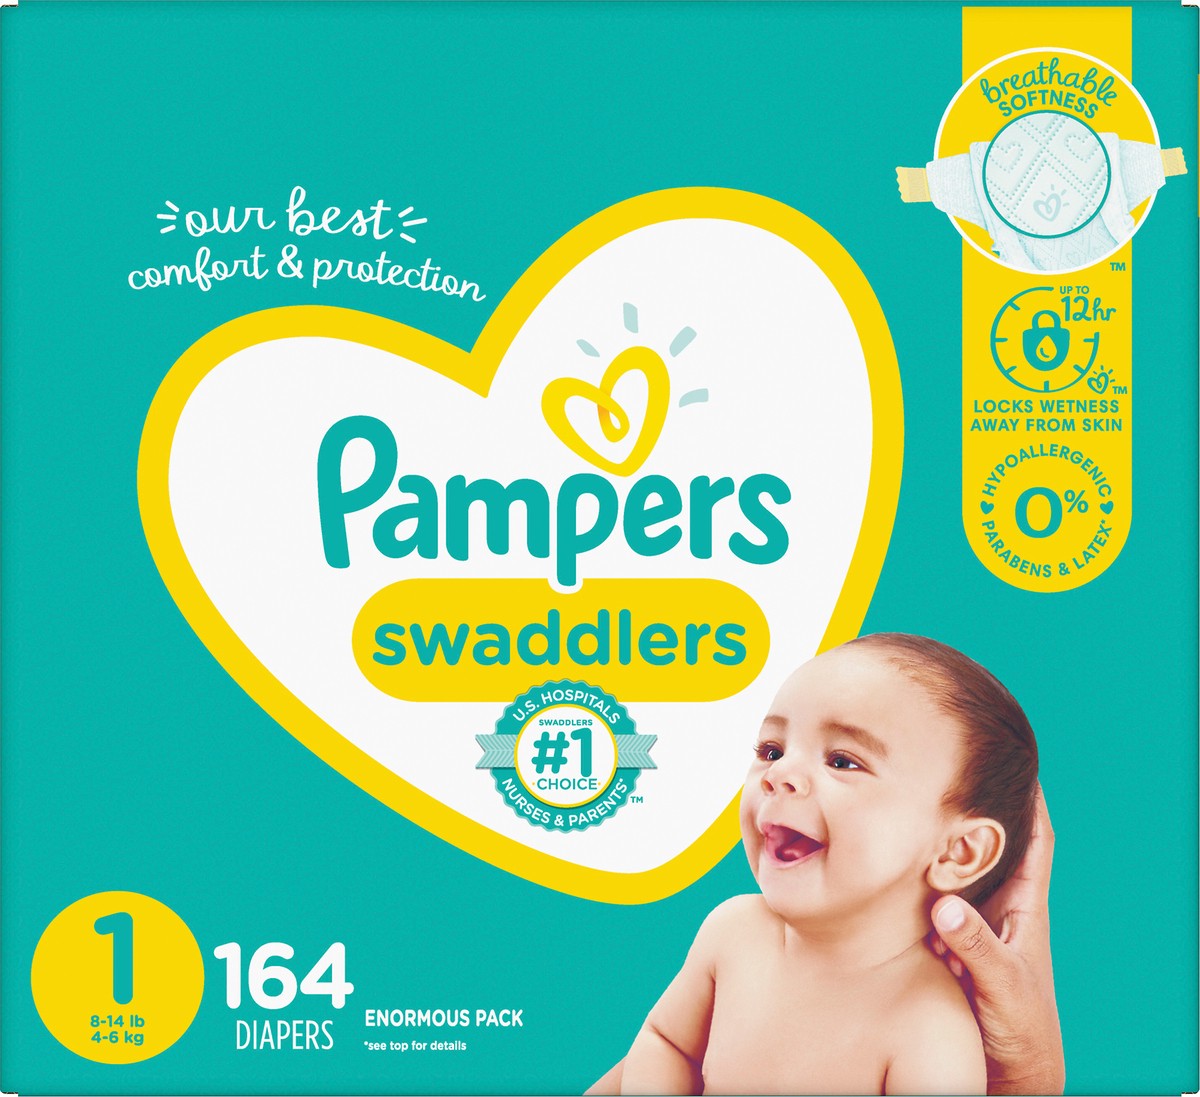 slide 2 of 6, Pampers Swaddlers Enormous Pack 1 (8-14 lb) Diapers 164 ea, 164 ct